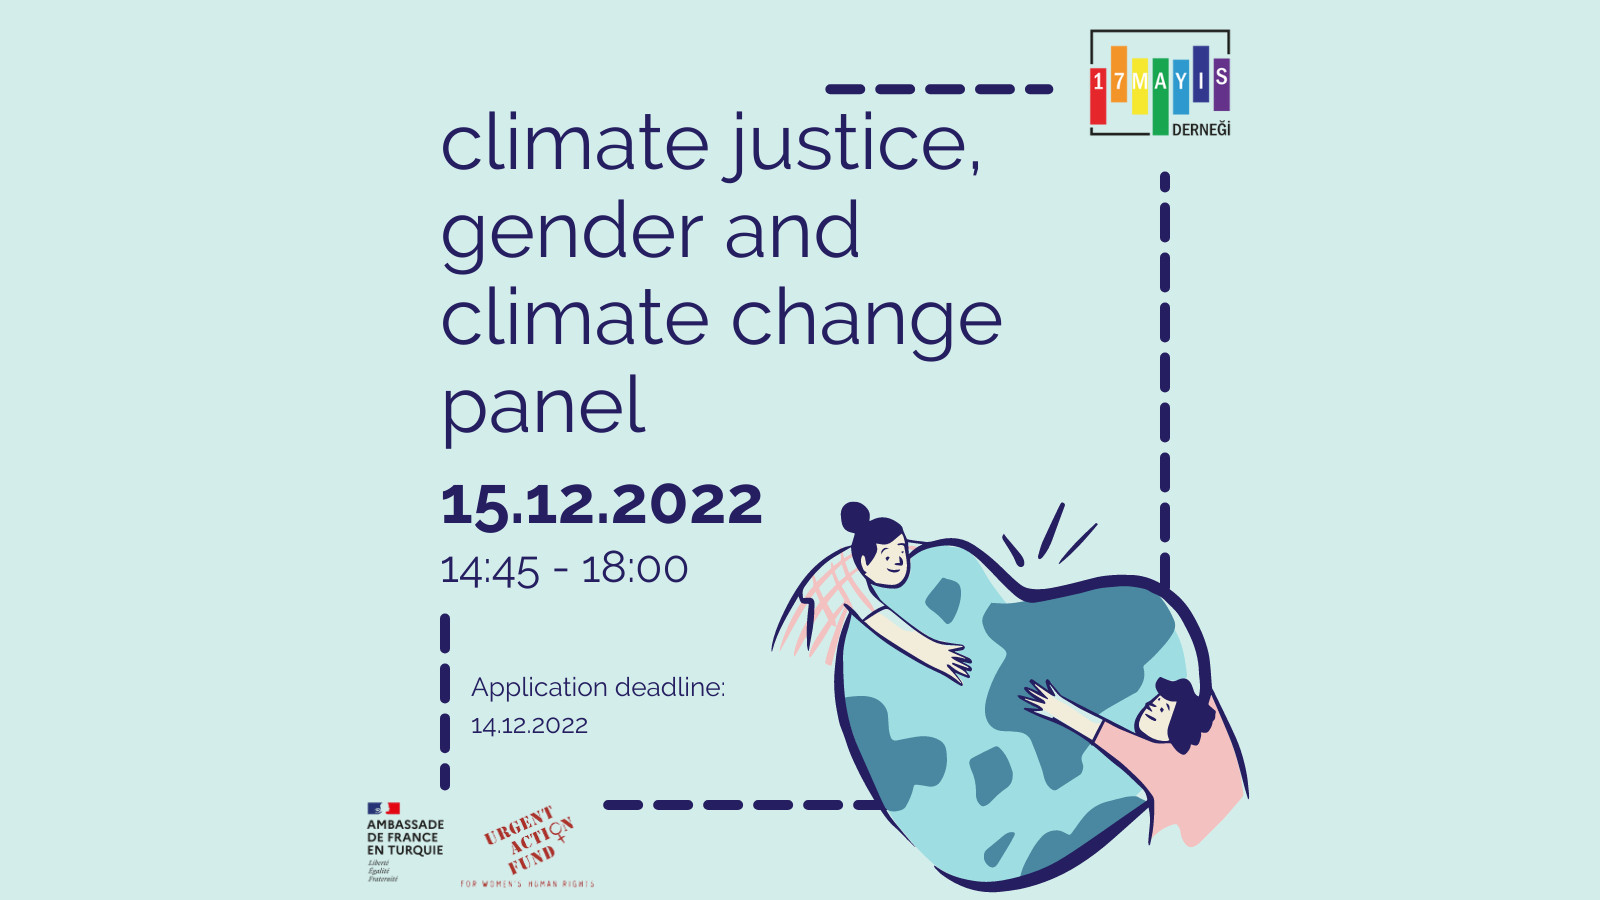 Registration for the Climate Justice, Gender and Climate Change Panel has Started! - May 17 Association